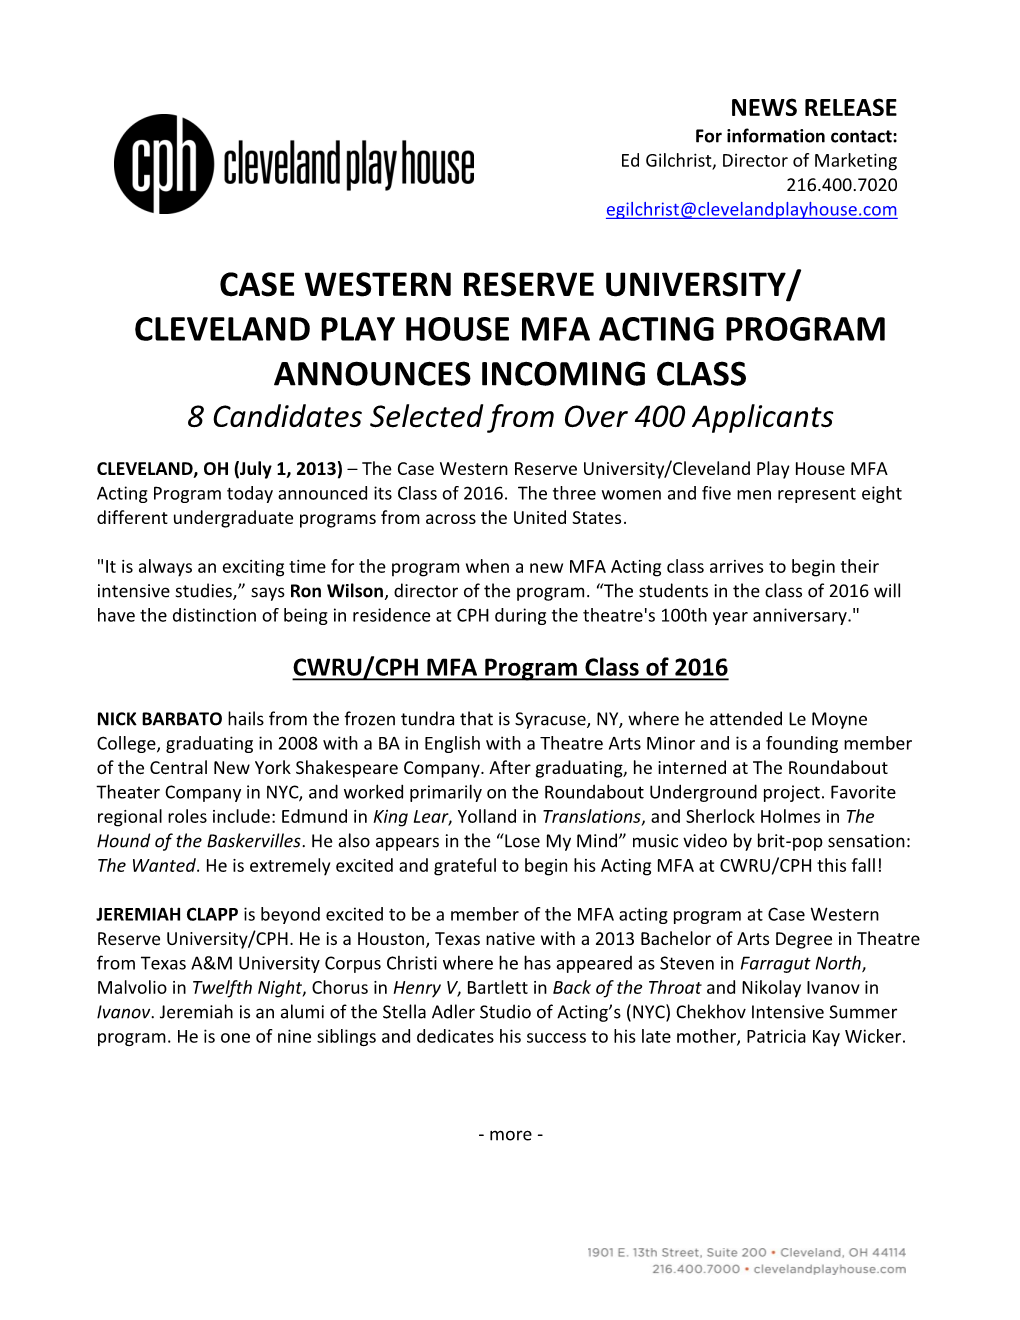 CASE WESTERN RESERVE UNIVERSITY/ CLEVELAND PLAY HOUSE MFA ACTING PROGRAM ANNOUNCES INCOMING CLASS 8 Candidates Selected from Over 400 Applicants